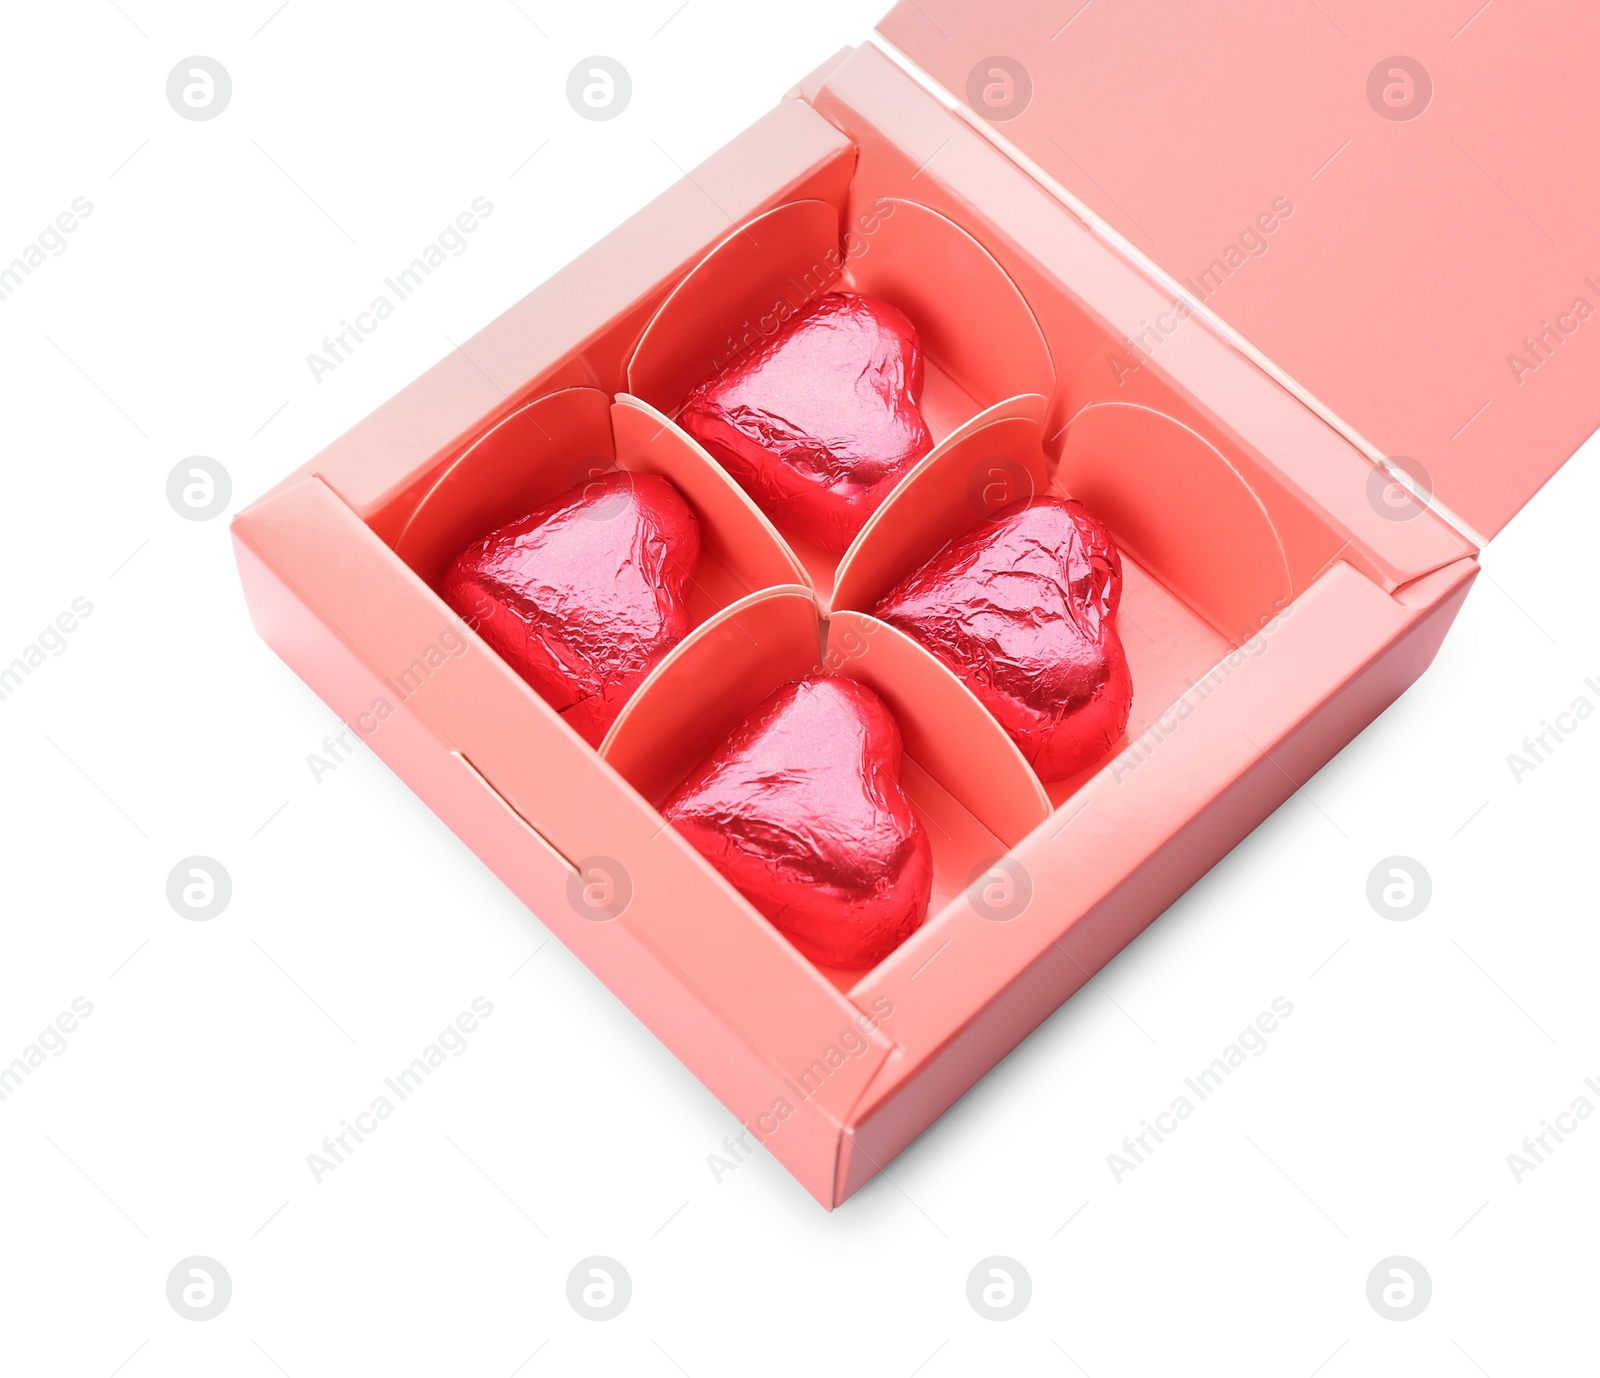 Photo of Heart shaped chocolate candies in box on white background